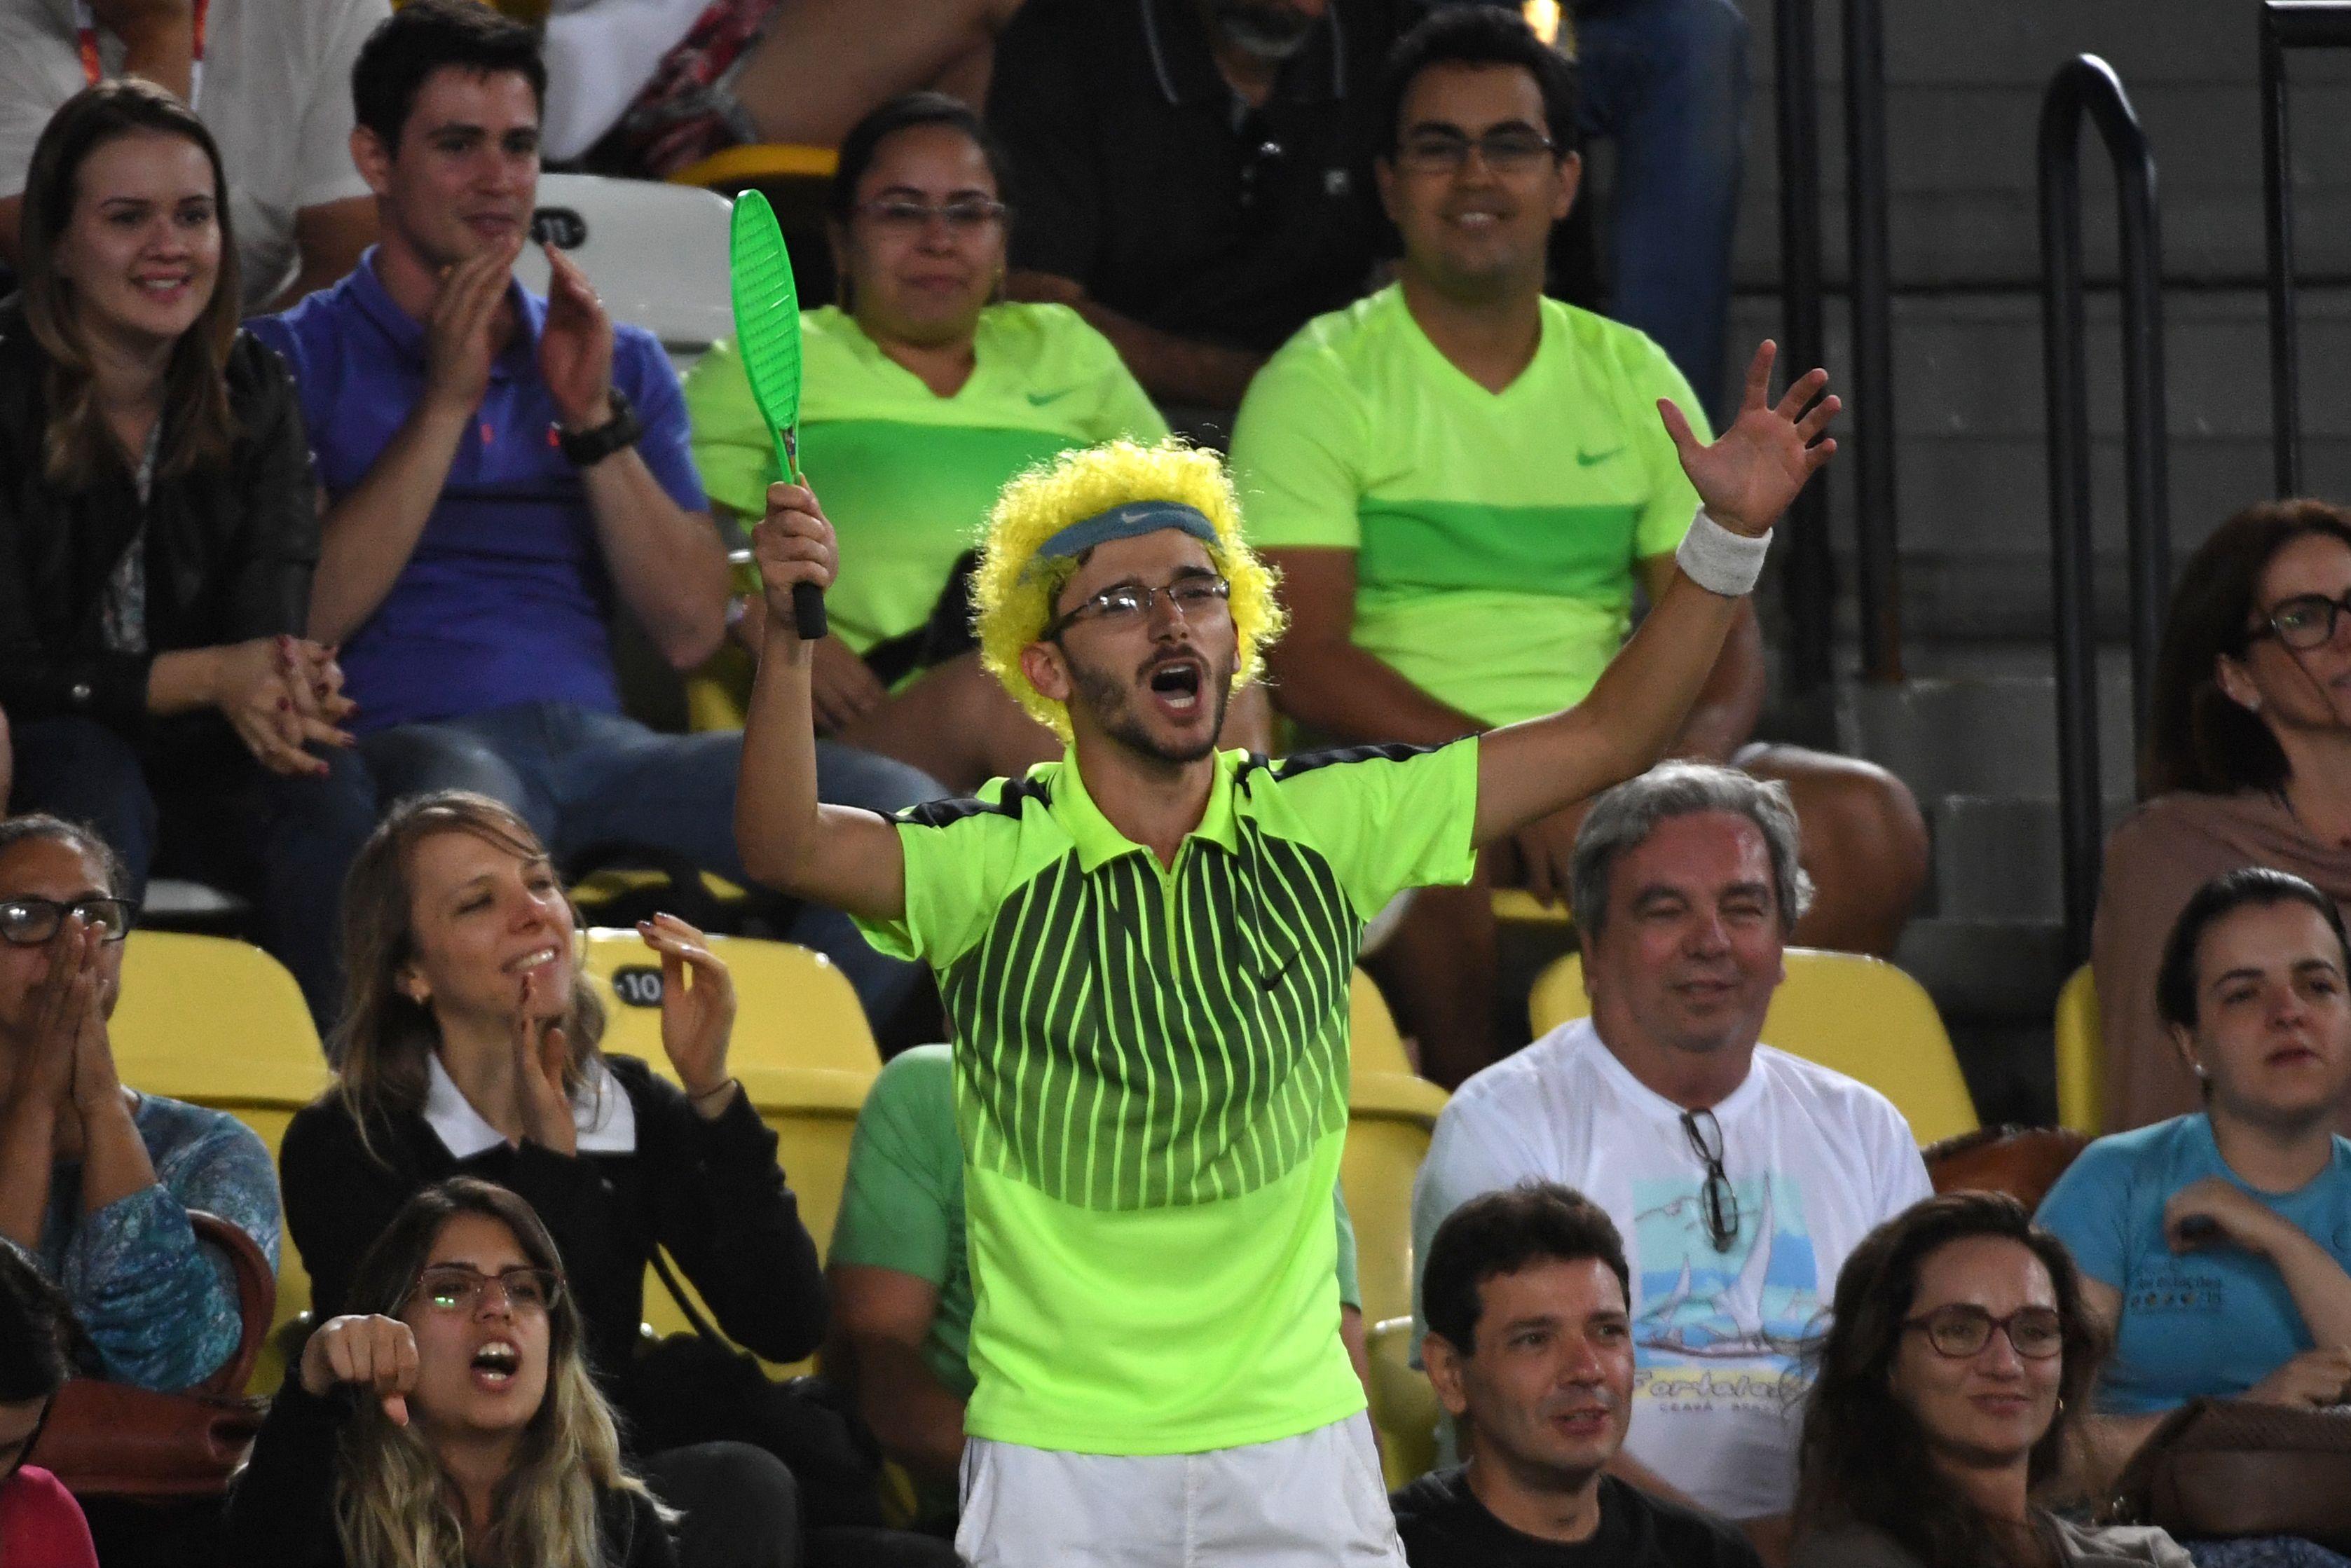 A fan wearing a green wig cheers during the men's second round singles tennis match between Japan's Kei Nishikori and Australia's John Millman at the Olympic Tennis Centre of the Rio 2016 Olympic Games in Rio de Janeiro on August 8, 2016. (Roberto Schmidt—AFP/Getty Images)